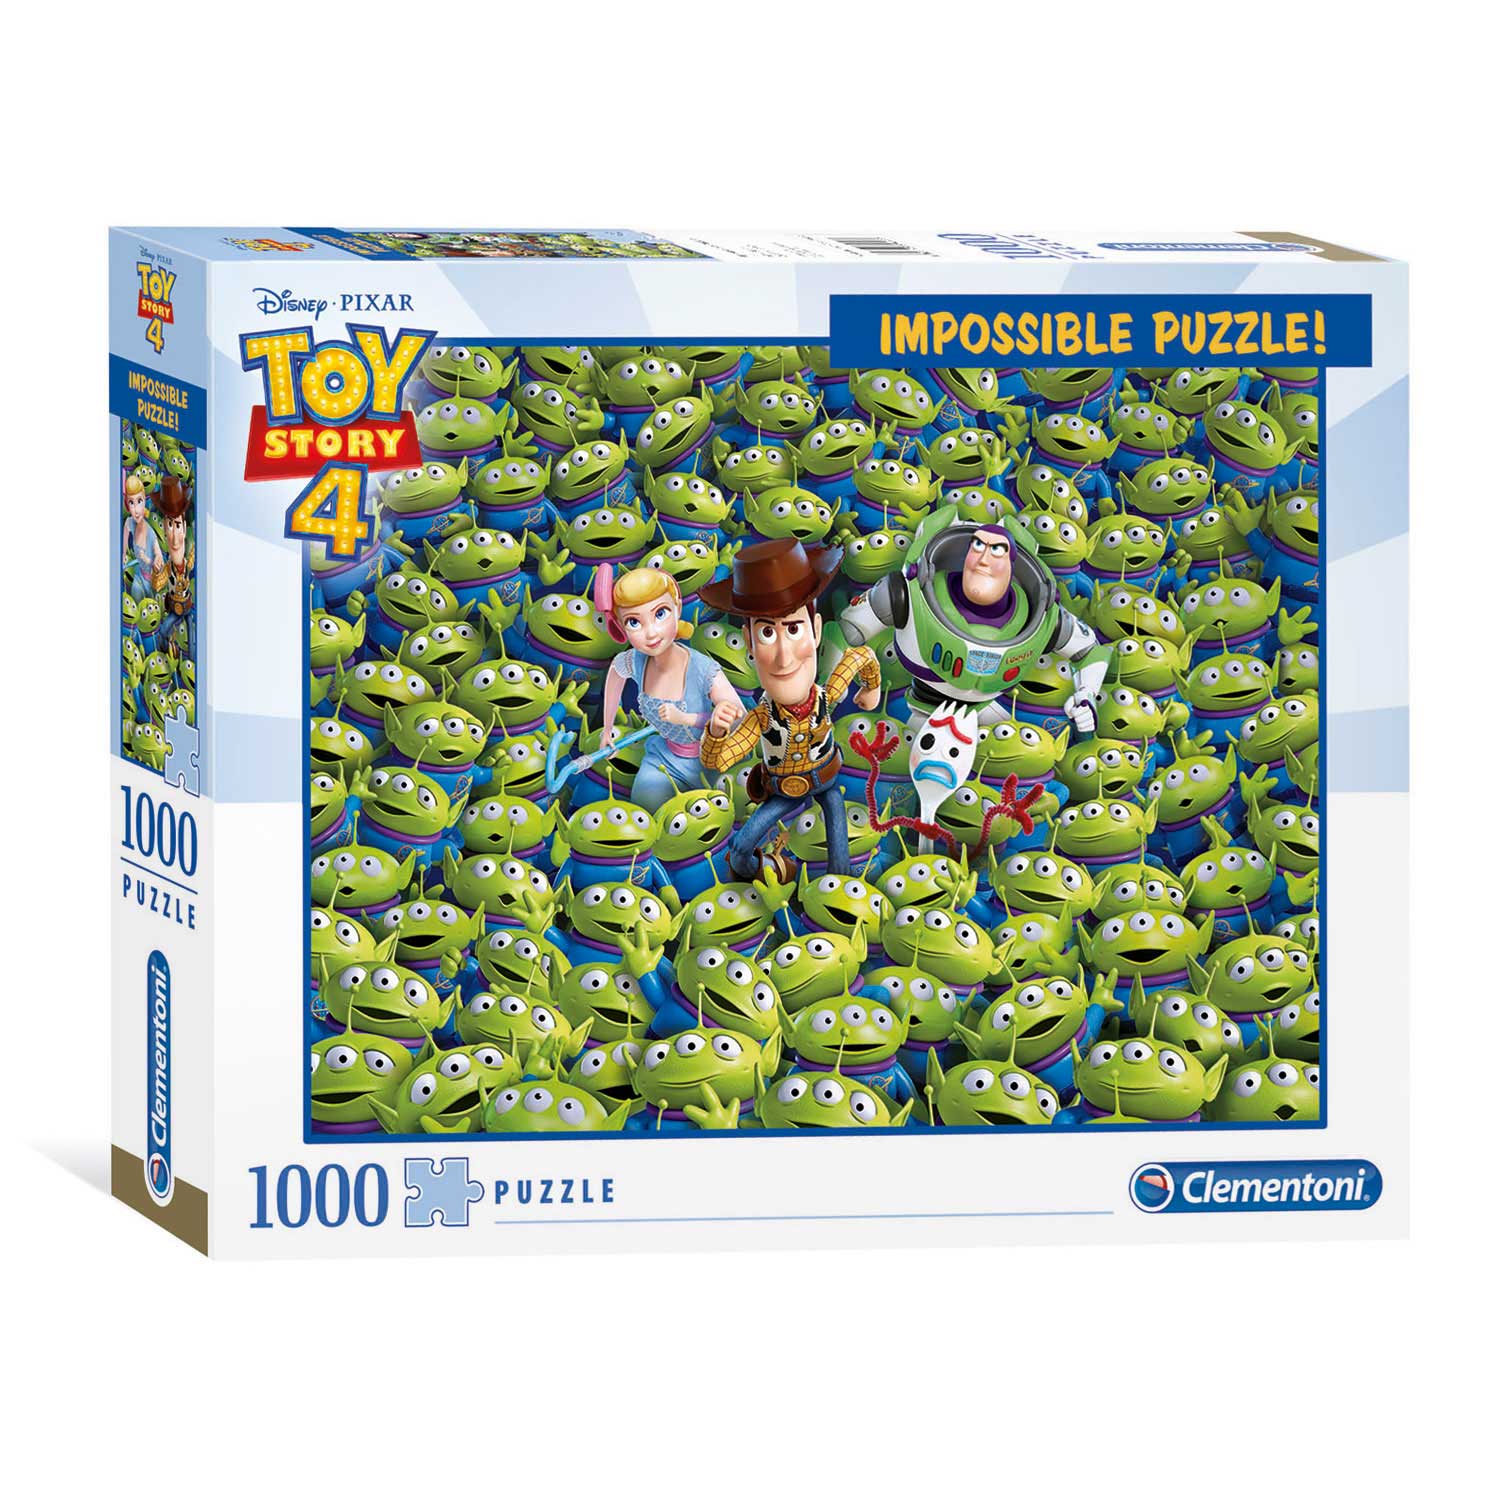 Clementoni Impossible Puzzel Toy Story